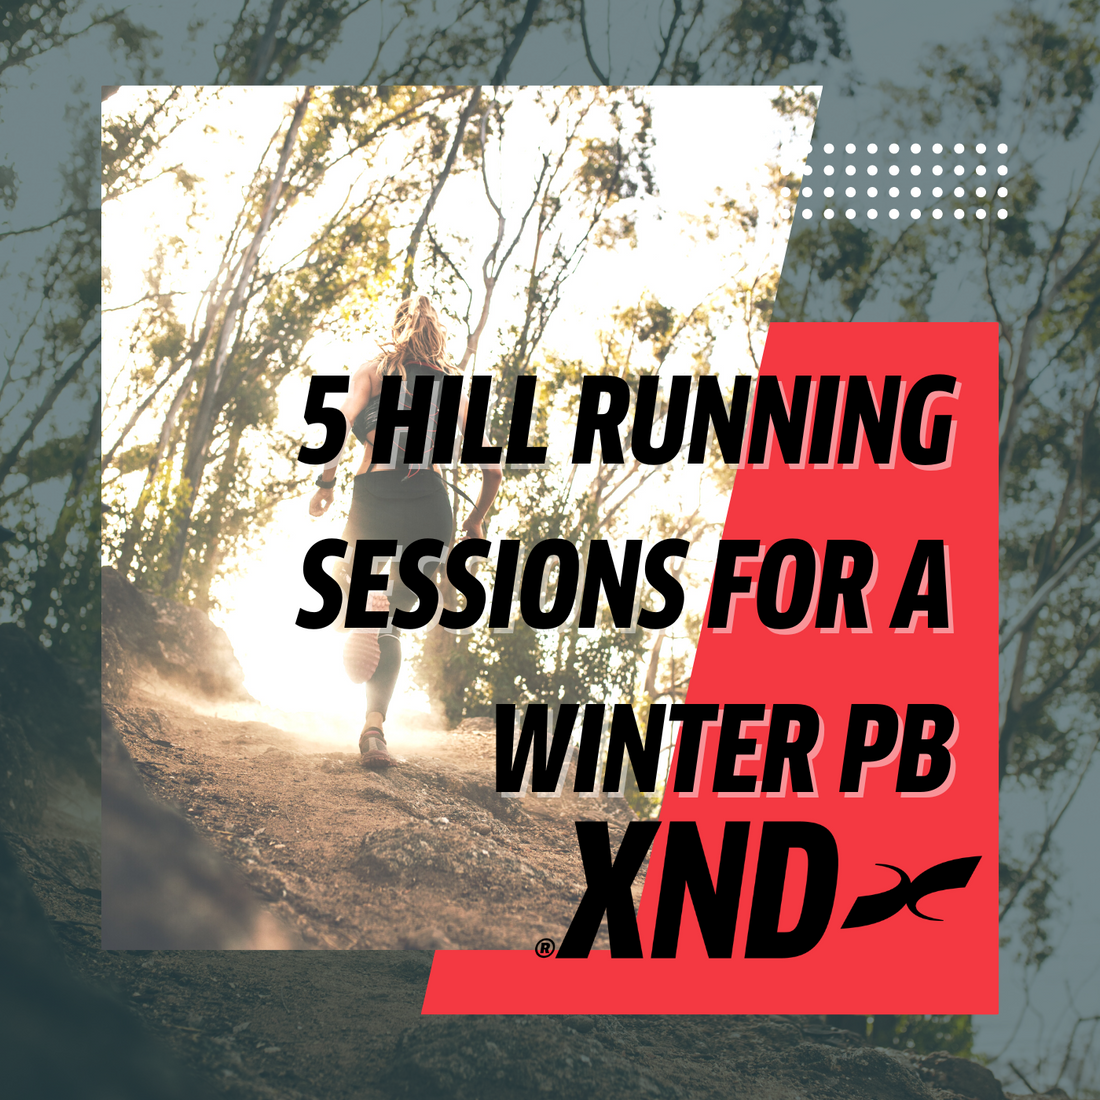 5 Hill Running sessions for a winter PB